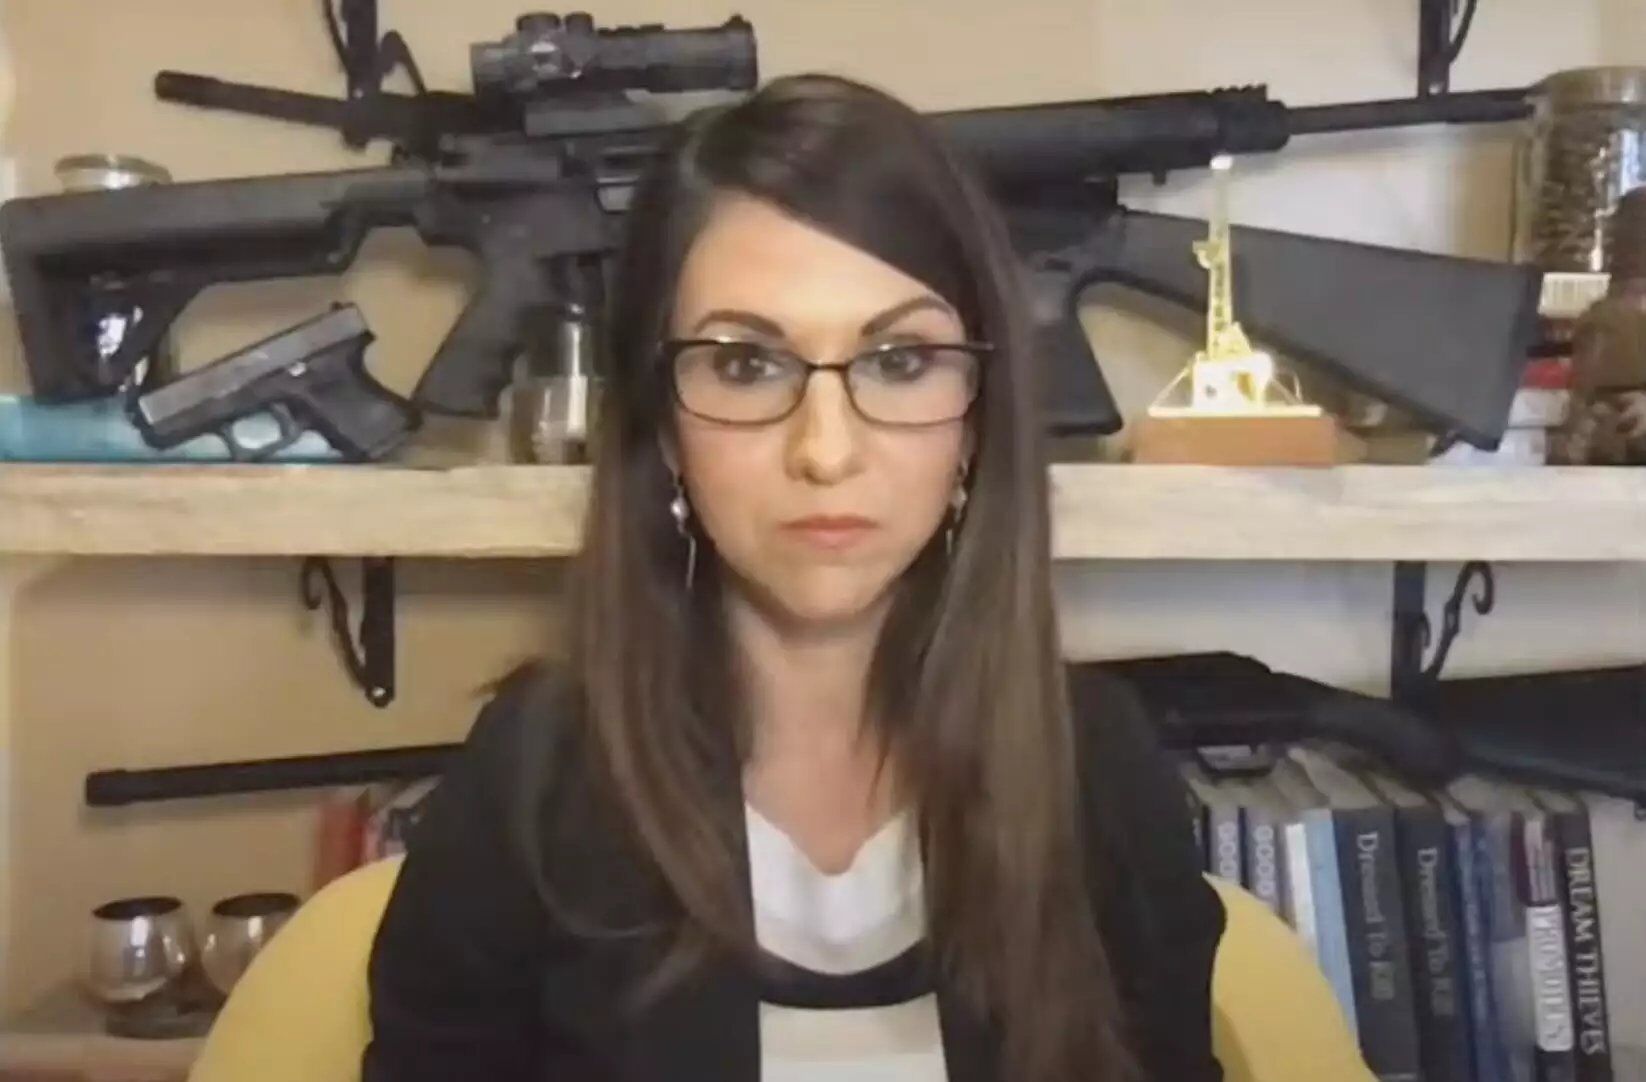 Rep. Lauren Boebert (R-CO) poses in front of a bunch of guns because she thinks it makes her look tough